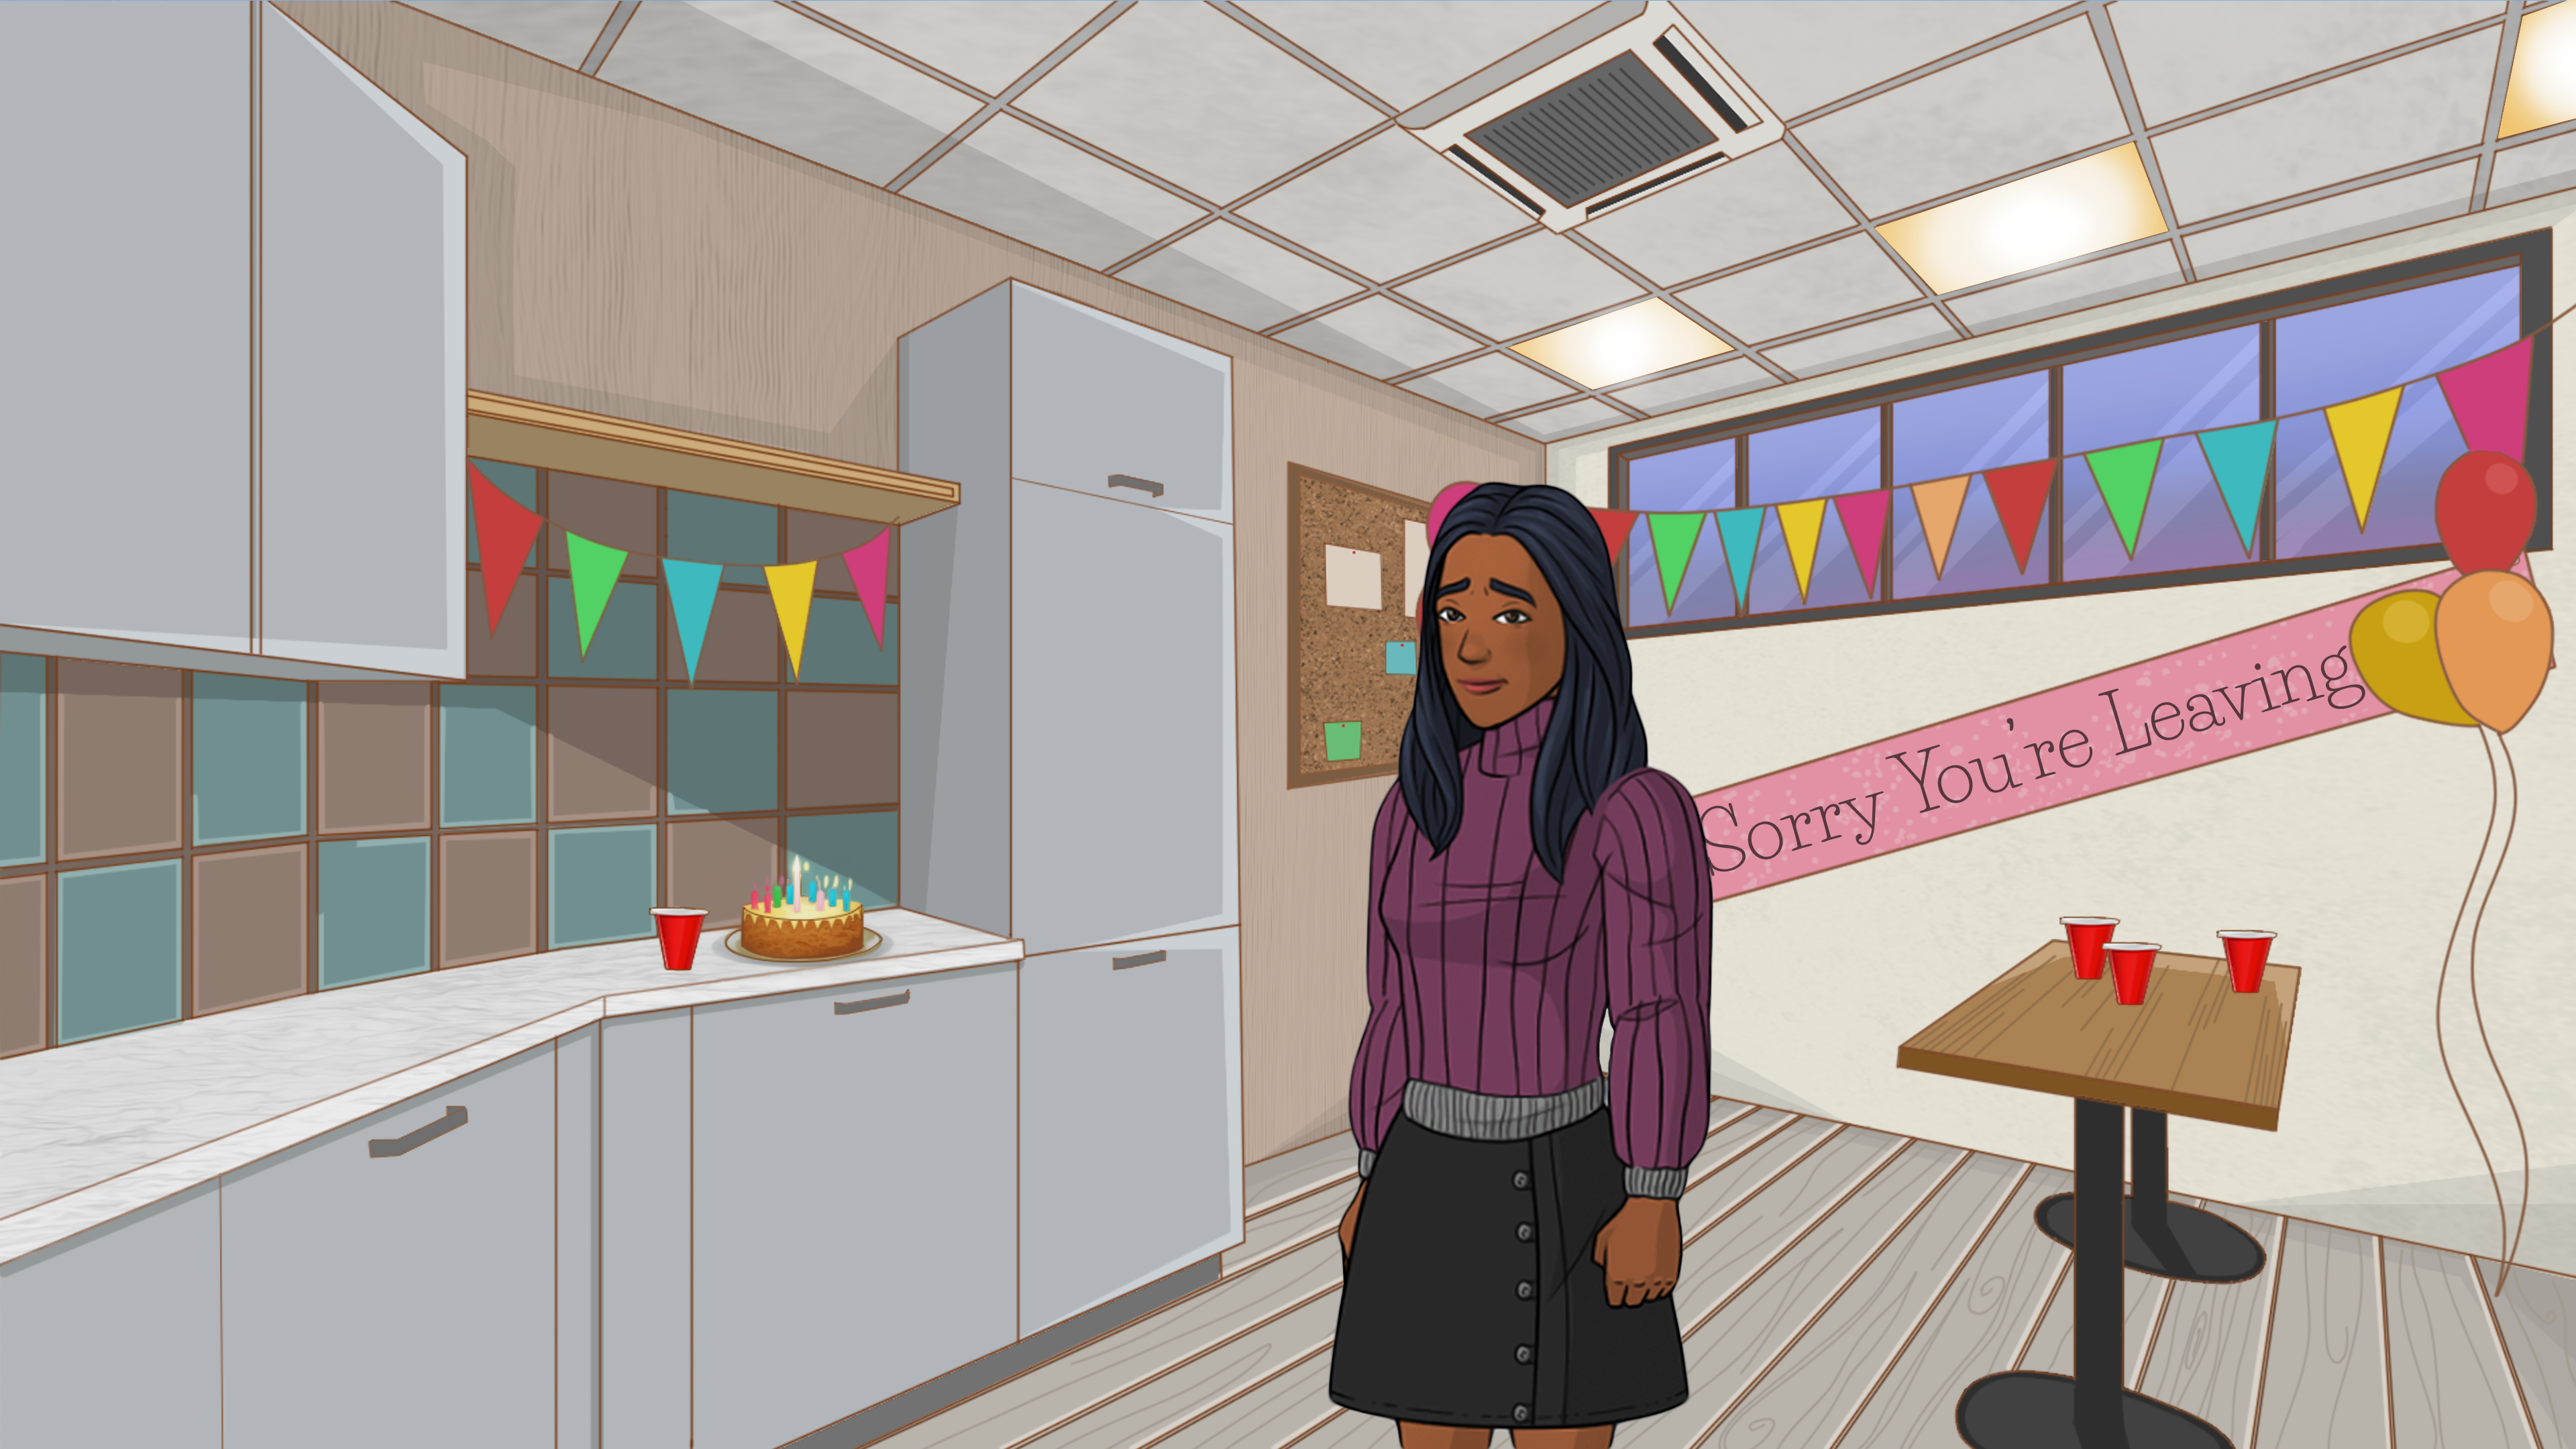 A character stands in an office kitchen, front of a 'sorry you are leaving' banner.